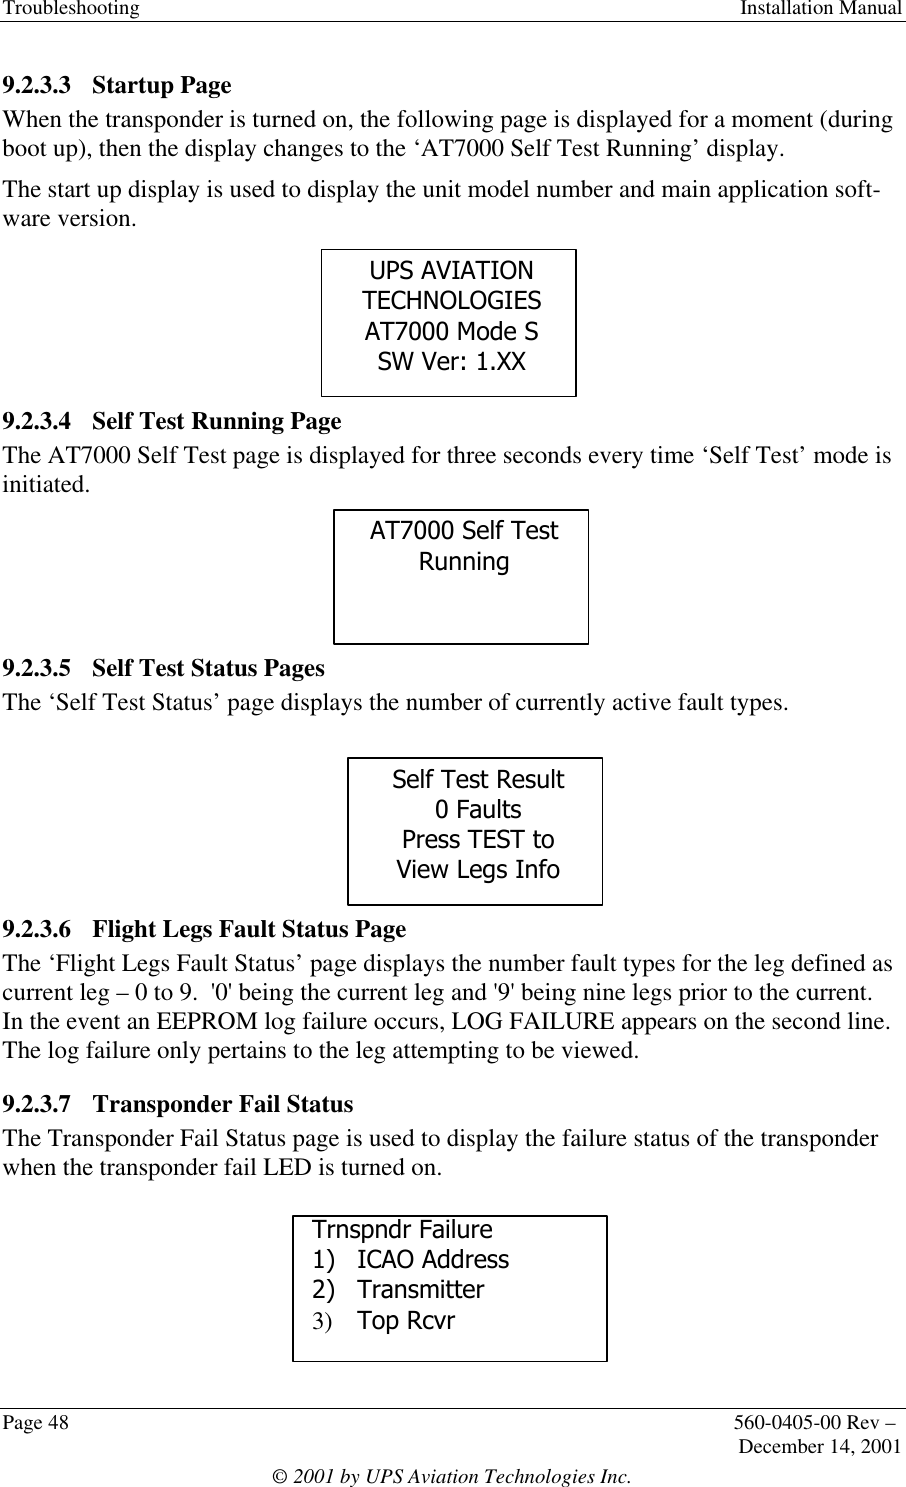 Troubleshooting  Installation ManualPage 48 560-0405-00 Rev –December 14, 2001© 2001 by UPS Aviation Technologies Inc.9.2.3.3 Startup PageWhen the transponder is turned on, the following page is displayed for a moment (duringboot up), then the display changes to the ‘AT7000 Self Test Running’ display.The start up display is used to display the unit model number and main application soft-ware version.9.2.3.4 Self Test Running PageThe AT7000 Self Test page is displayed for three seconds every time ‘Self Test’ mode isinitiated.9.2.3.5 Self Test Status PagesThe ‘Self Test Status’ page displays the number of currently active fault types.9.2.3.6 Flight Legs Fault Status PageThe ‘Flight Legs Fault Status’ page displays the number fault types for the leg defined ascurrent leg – 0 to 9.  &apos;0&apos; being the current leg and &apos;9&apos; being nine legs prior to the current.In the event an EEPROM log failure occurs, LOG FAILURE appears on the second line.The log failure only pertains to the leg attempting to be viewed.9.2.3.7 Transponder Fail StatusThe Transponder Fail Status page is used to display the failure status of the transponderwhen the transponder fail LED is turned on.Trnspndr Failure1) ICAO Address2) Transmitter3) Top RcvrUPS AVIATIONTECHNOLOGIESAT7000 Mode SSW Ver: 1.XXAT7000 Self TestRunningSelf Test Result0 FaultsPress TEST toView Legs Info